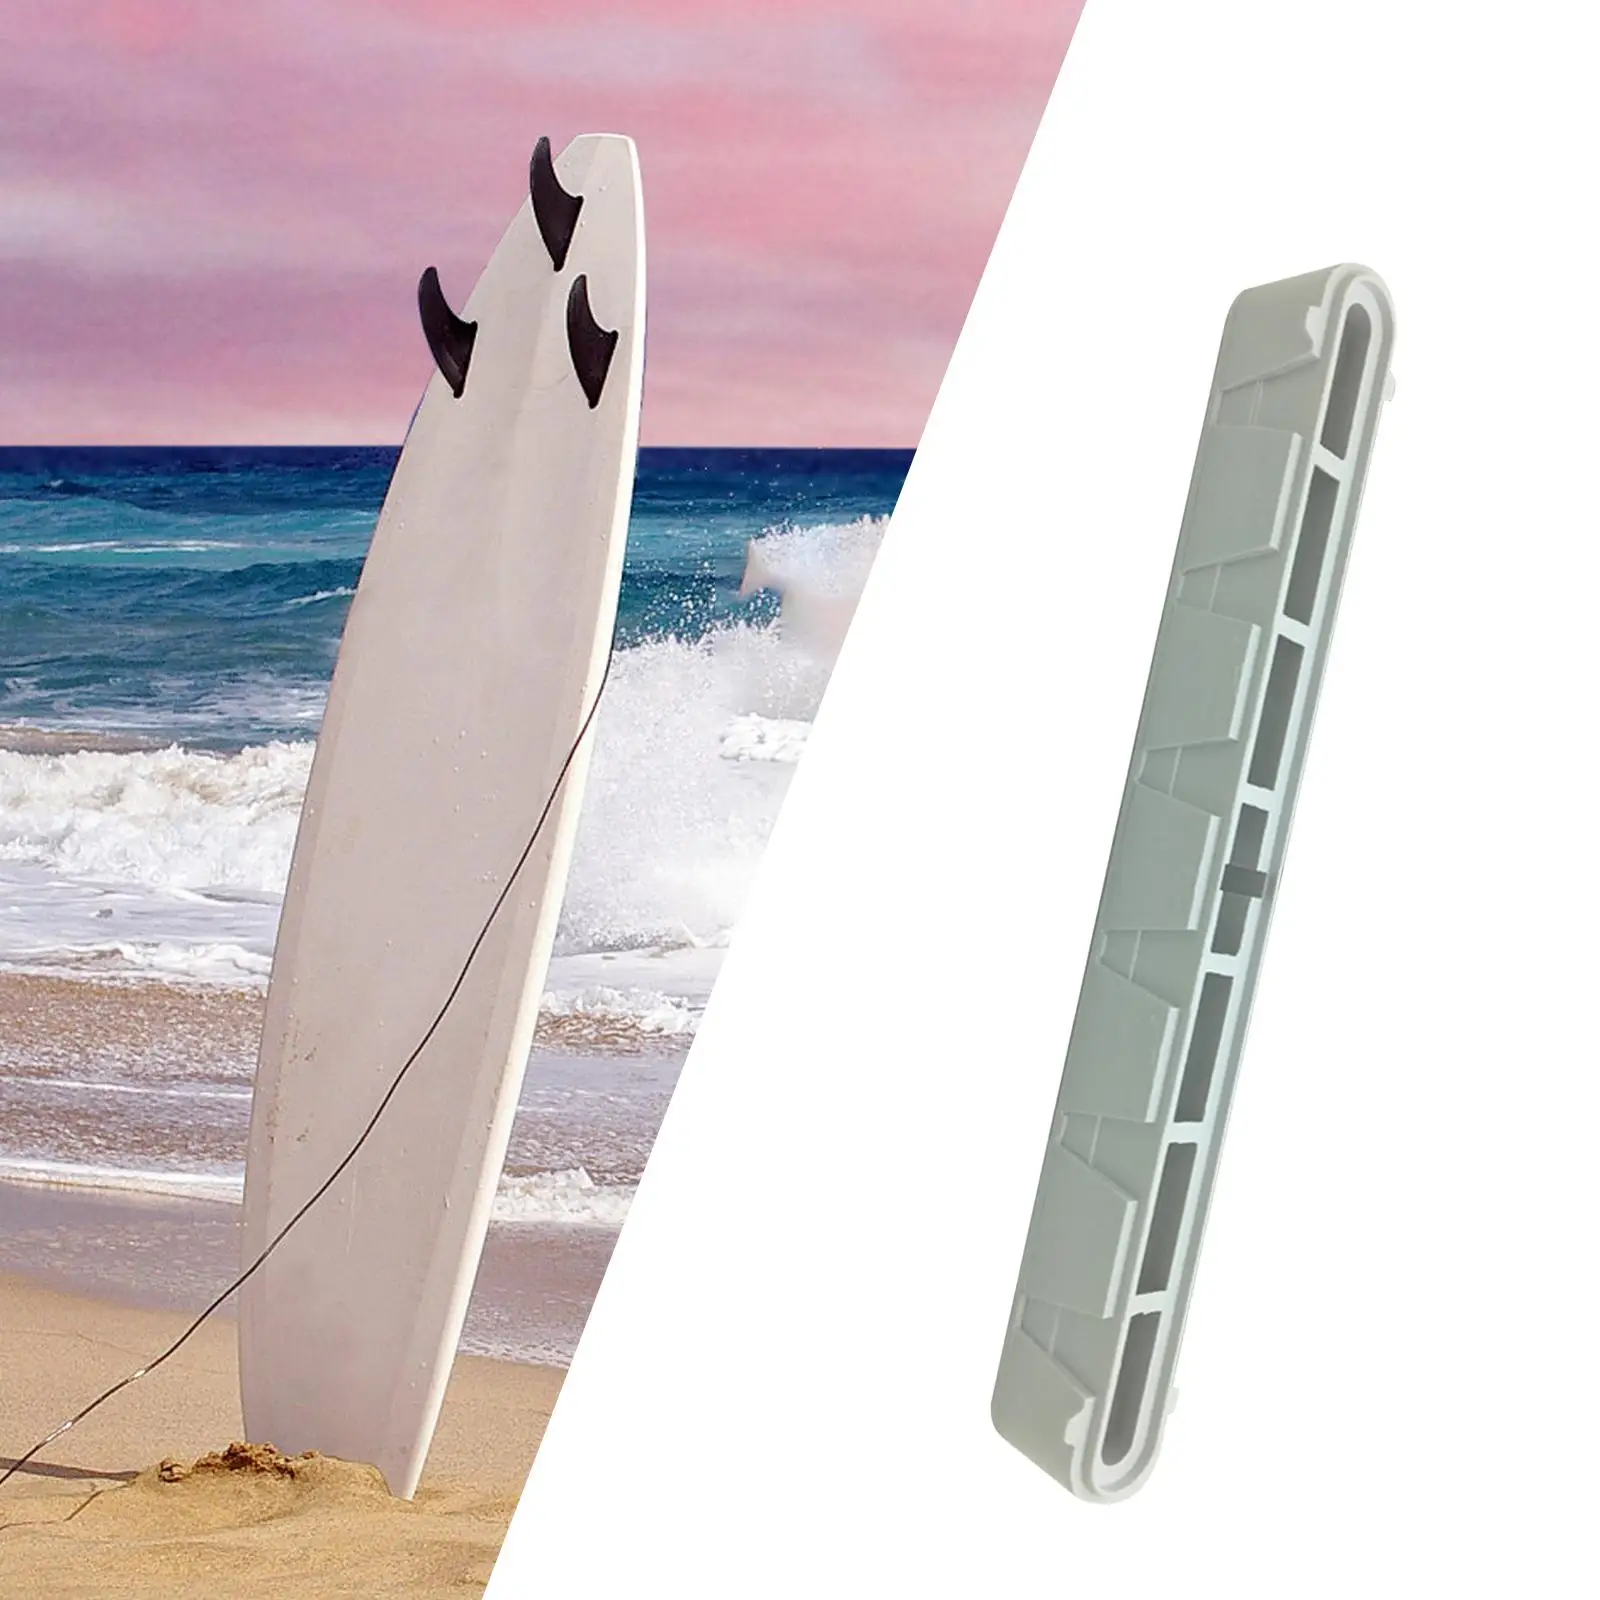 Longboard Surfboard Fin Box Easy Install Universal Durable Surfboard Fin Box for Water Sports Surfing Accessories Surfboards